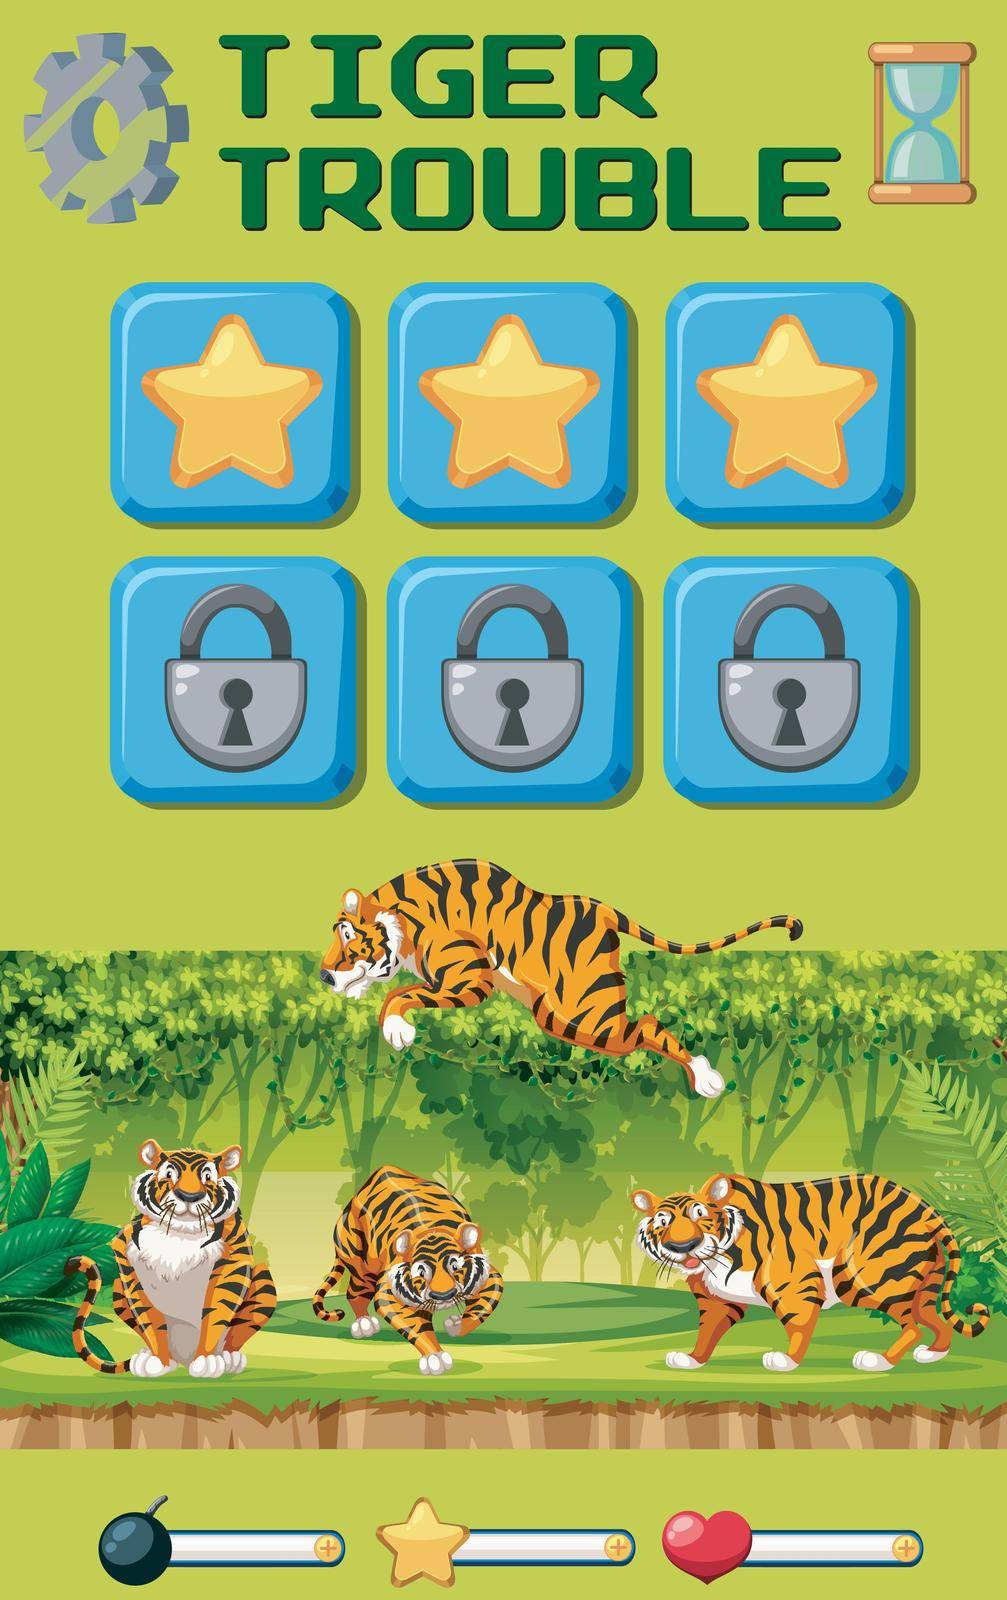 Tiger trouble game template illustration